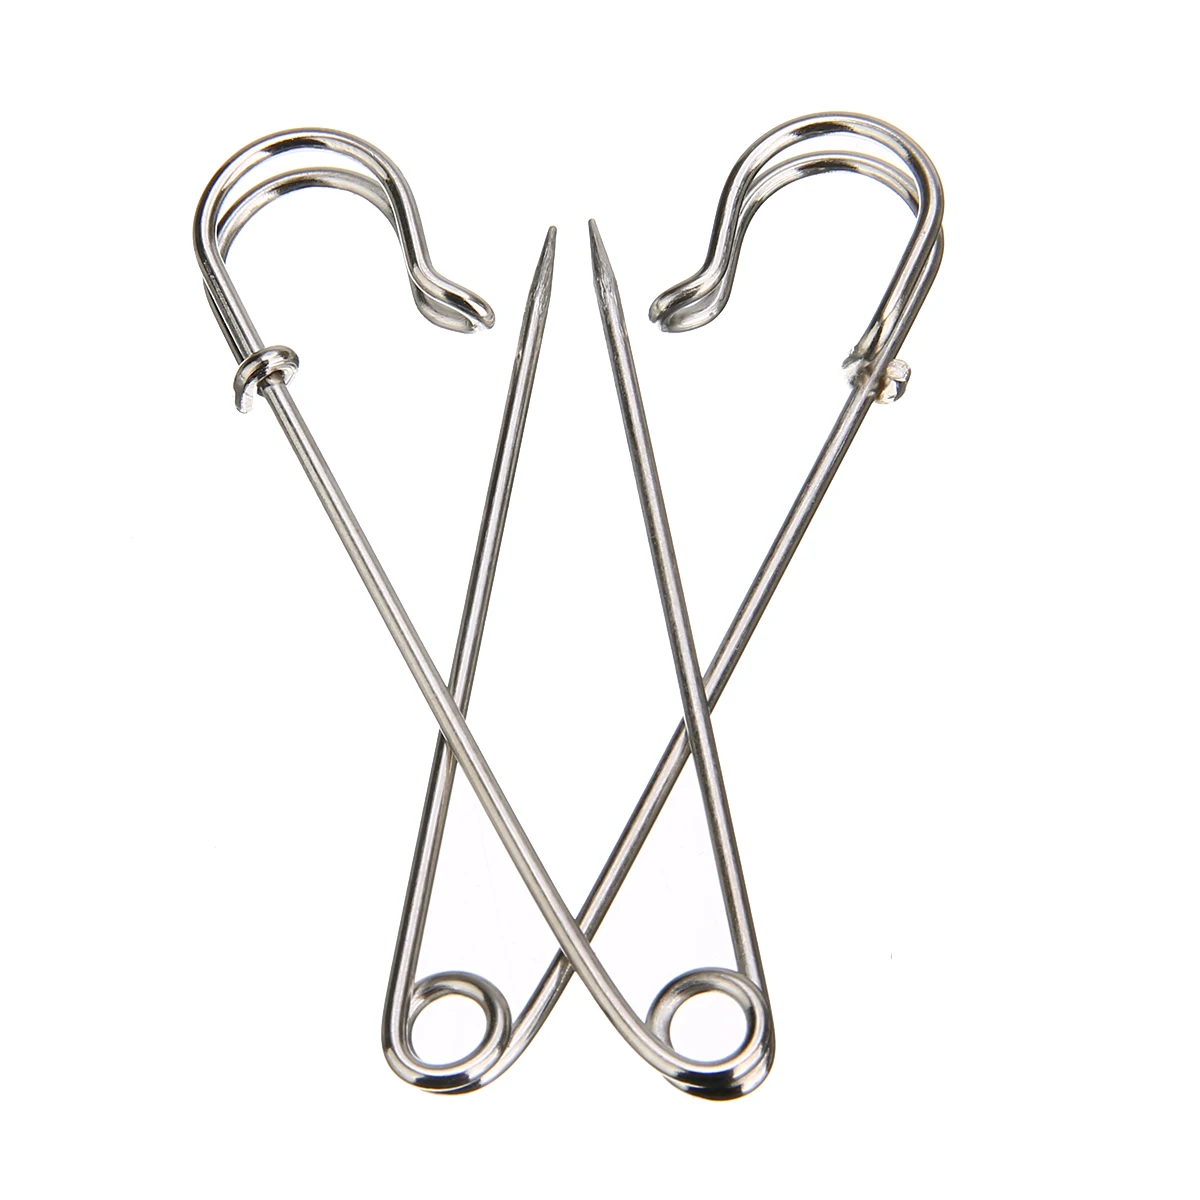 

12pcs Large Heavy Duty Stainless Steel Big Jumbo Safety Pin Blanket Crafting for Making Wedding Bouquet Brooch DIY Decoration